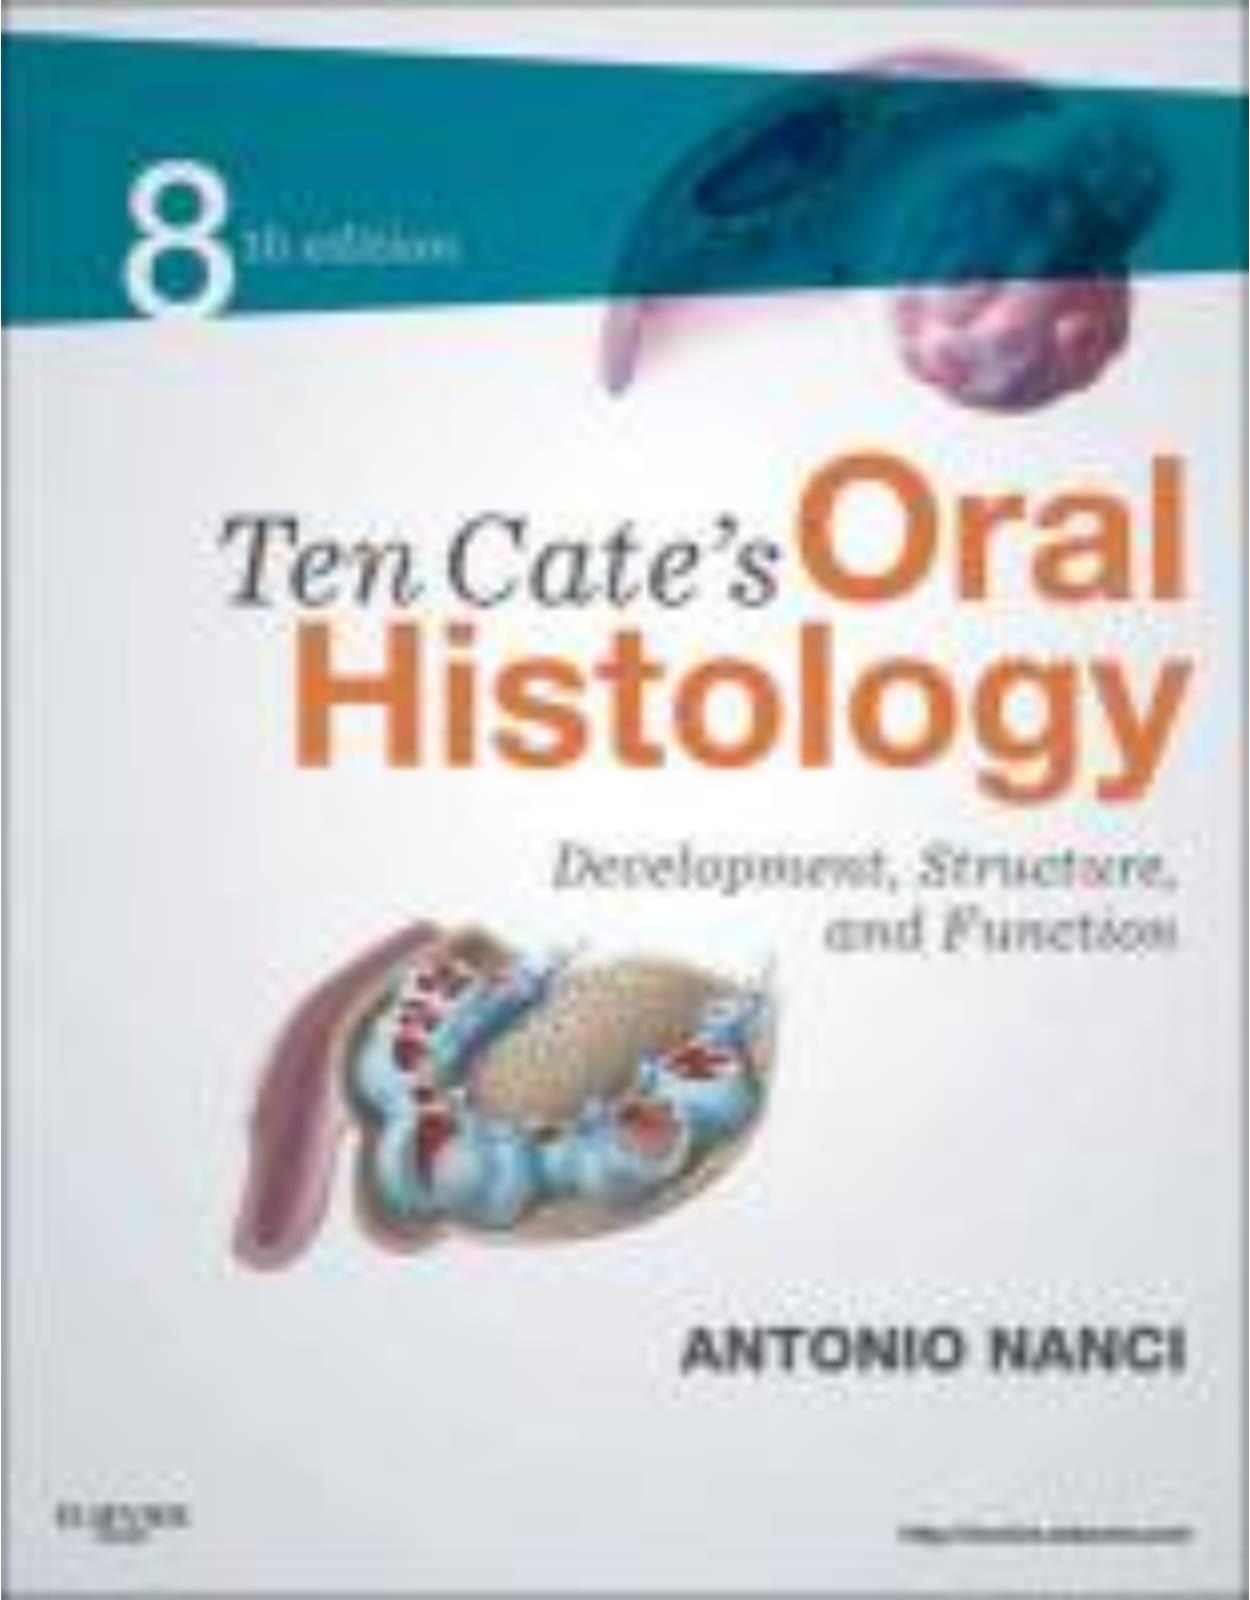 Ten Cate's Oral Histology, 8th Edition Development, Structure, and Function